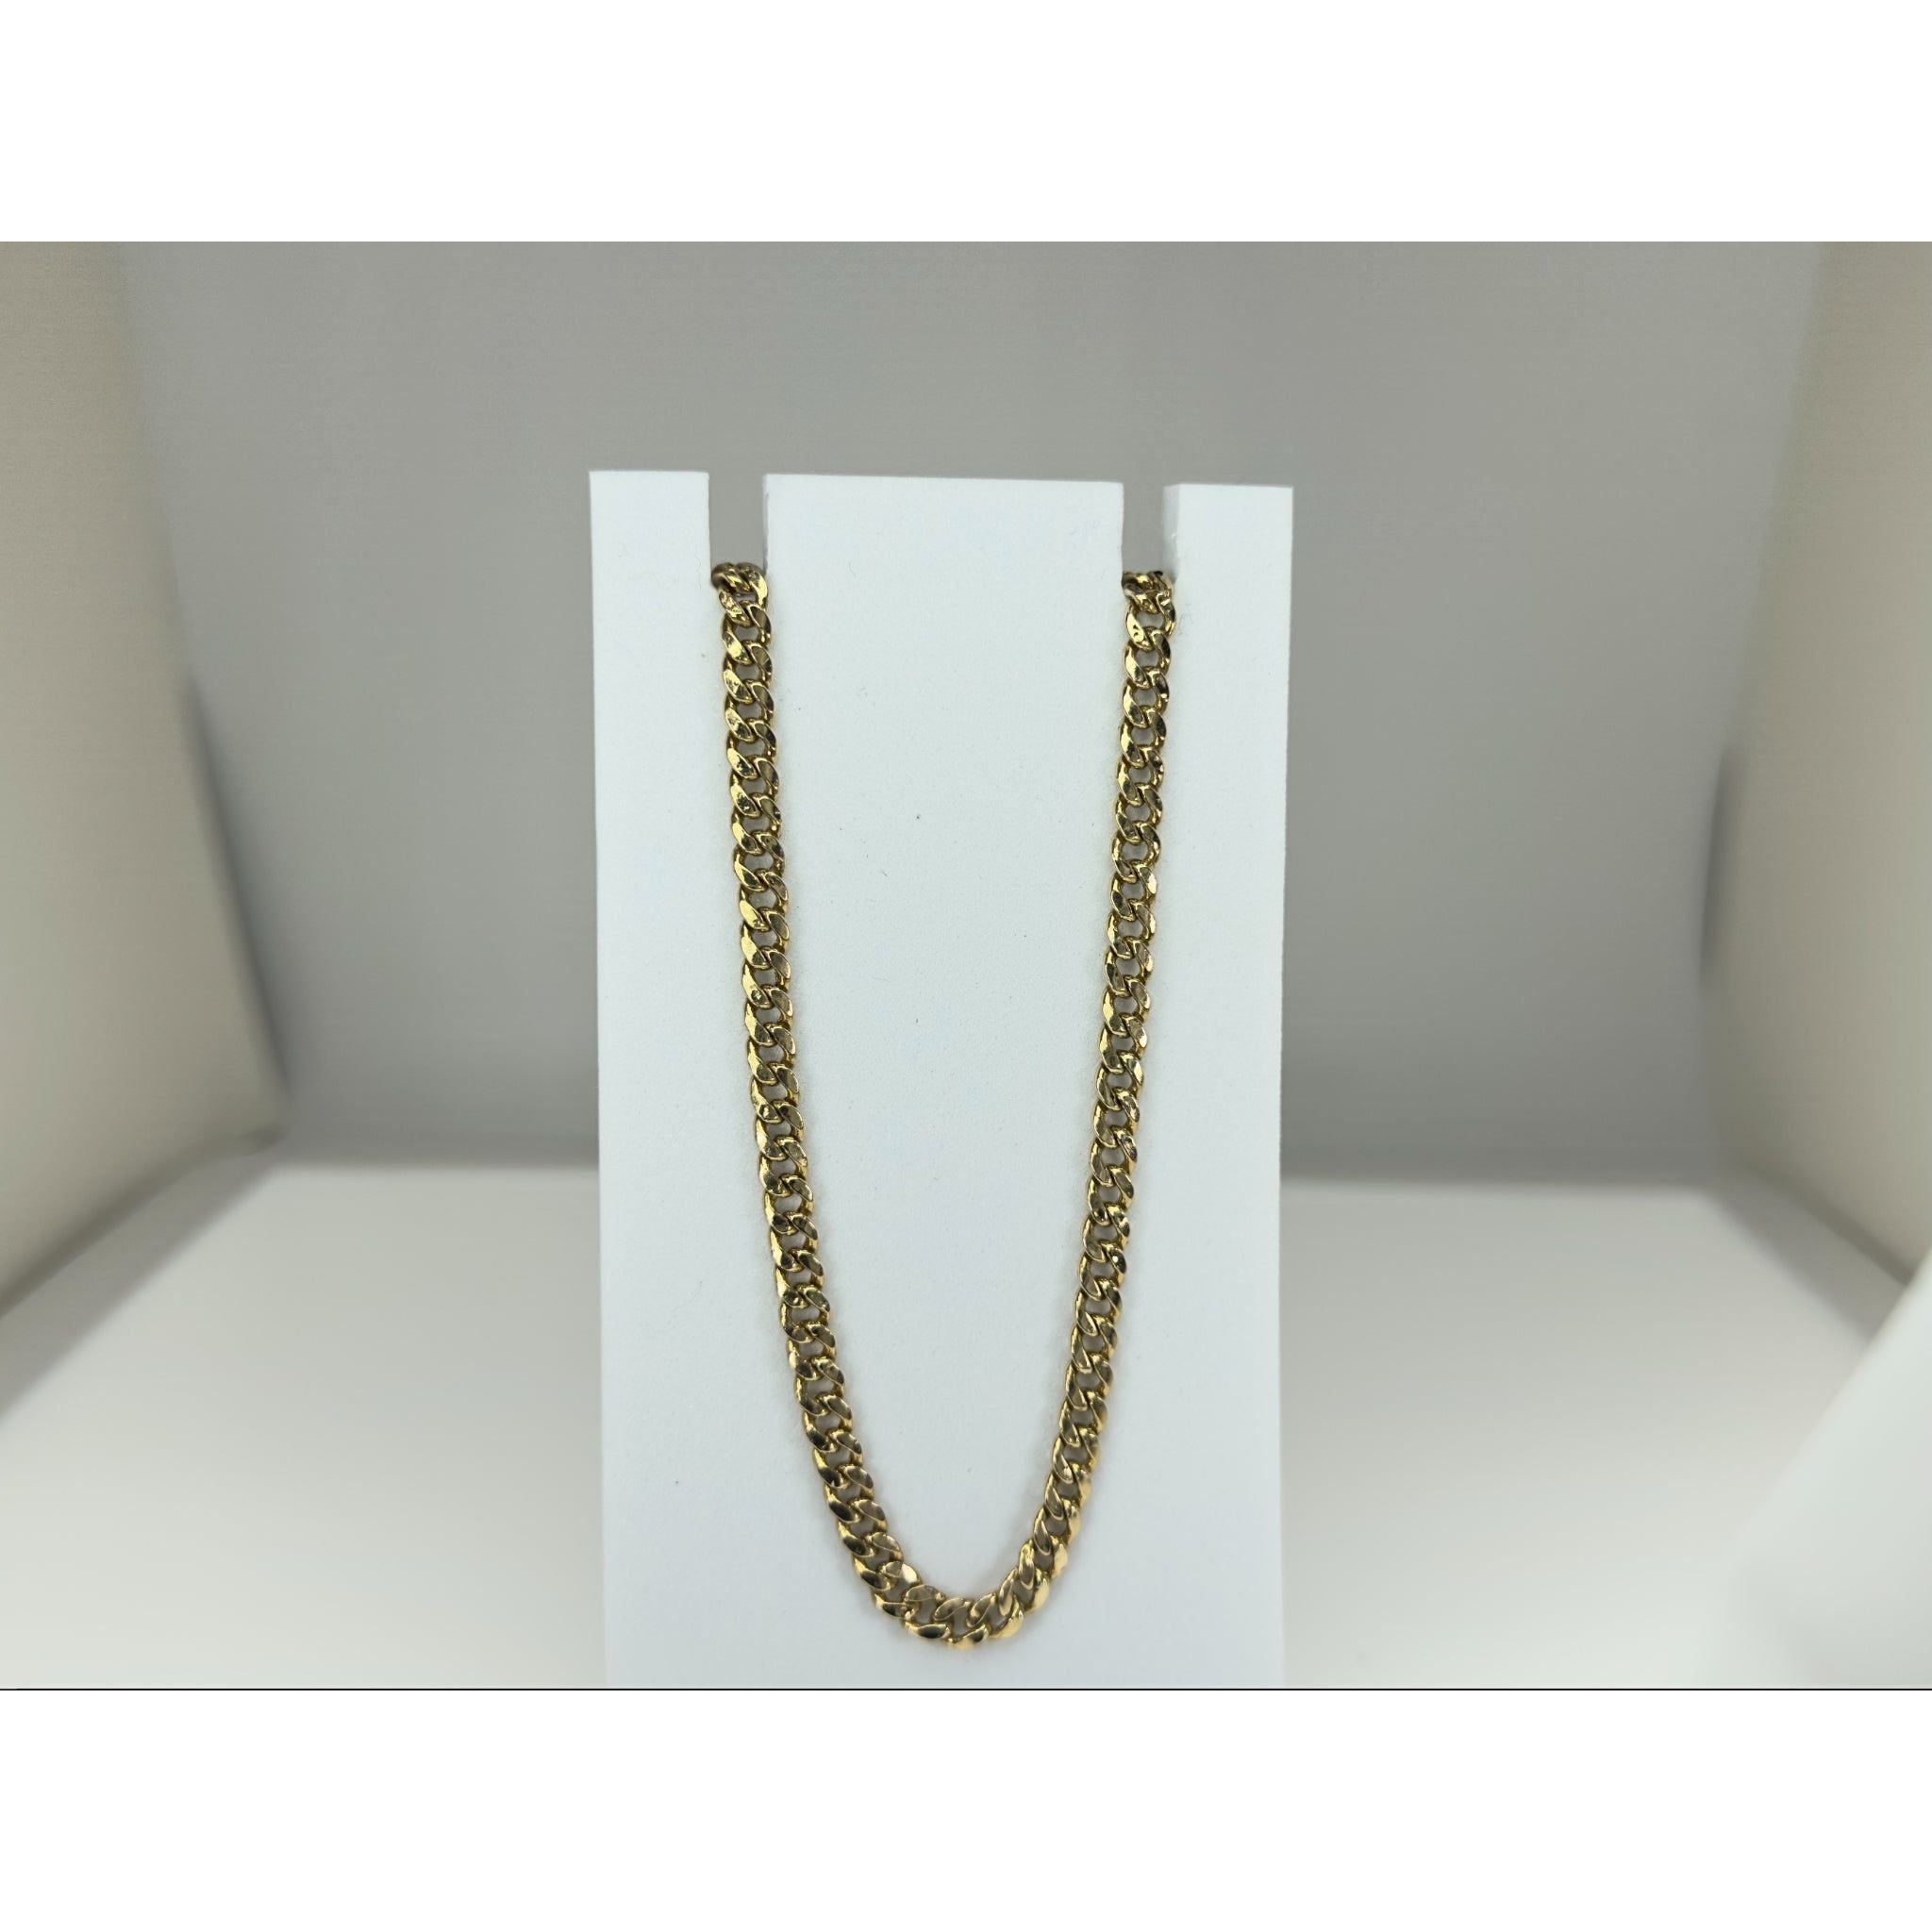 DR1725 - 14K Yellow Gold - Men's Gold Chains